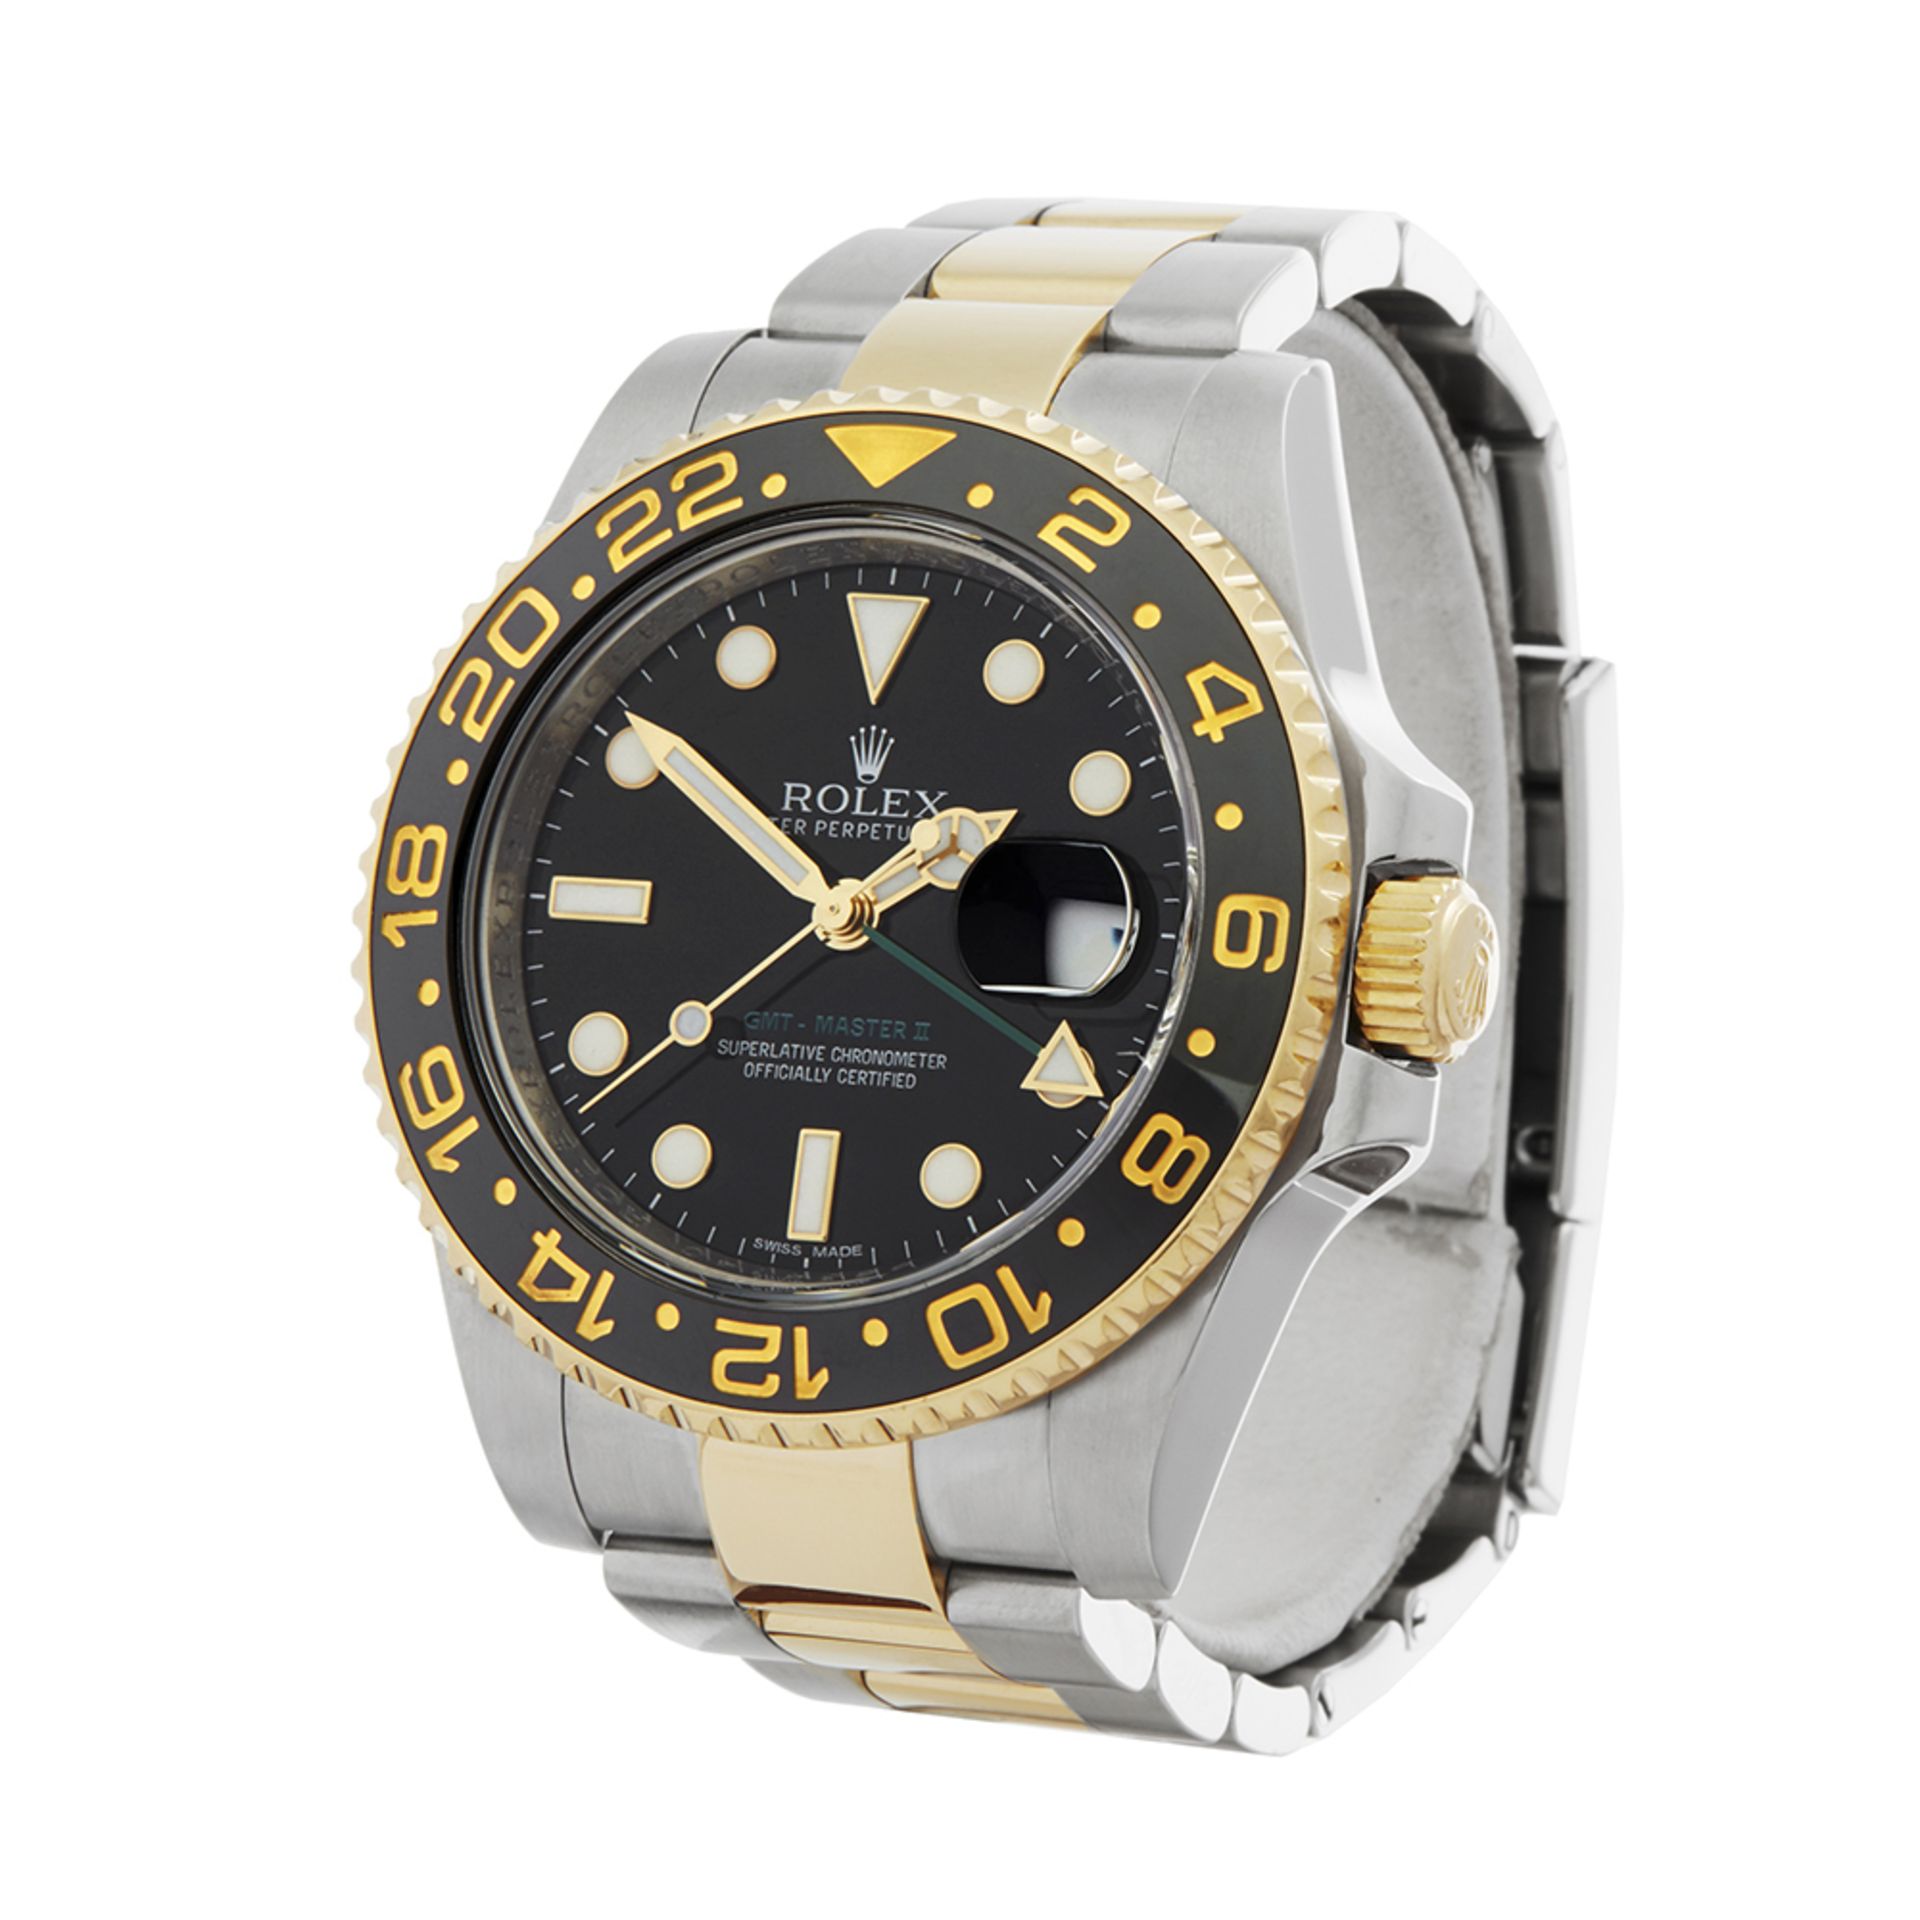 Rolex GMT-Master II Stainless Steel & 18K Yellow Gold - 116713 - Image 3 of 8